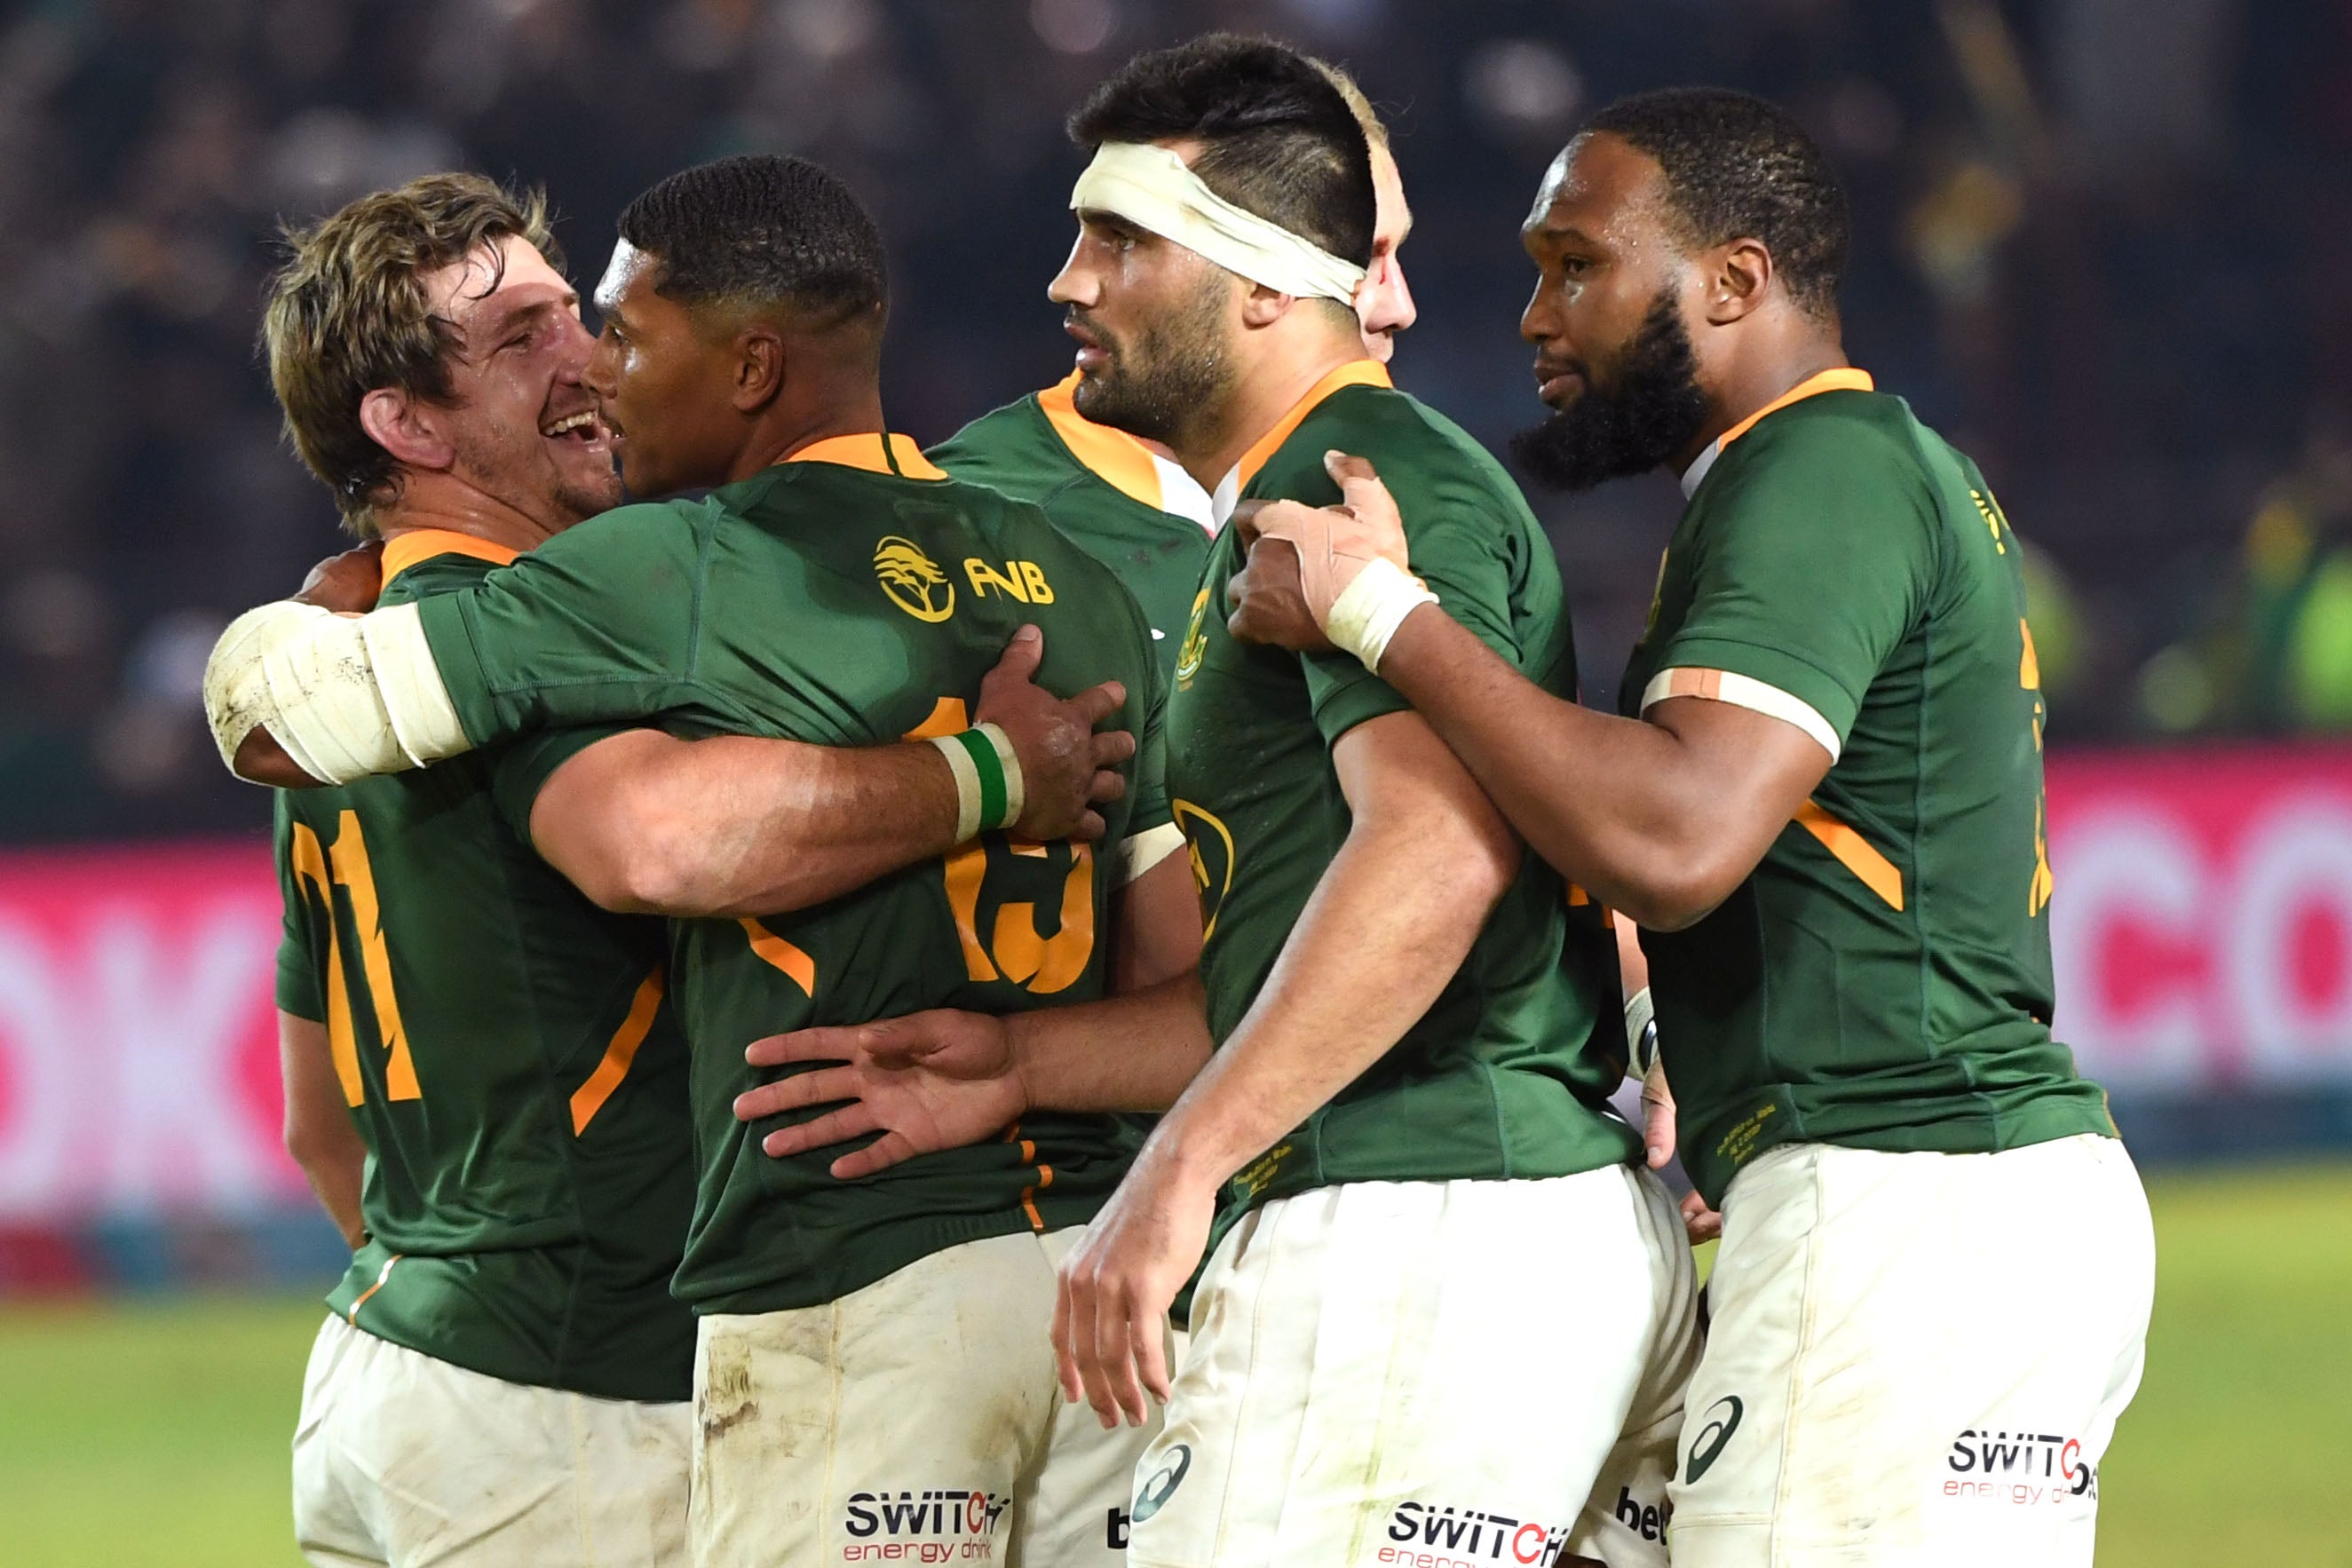 Kwagga Smith (left) hugs match-winner Damian Willemse after the first test match between South Africa and Wales at Loftus Versfeld on 2 July 2022 in Pretoria